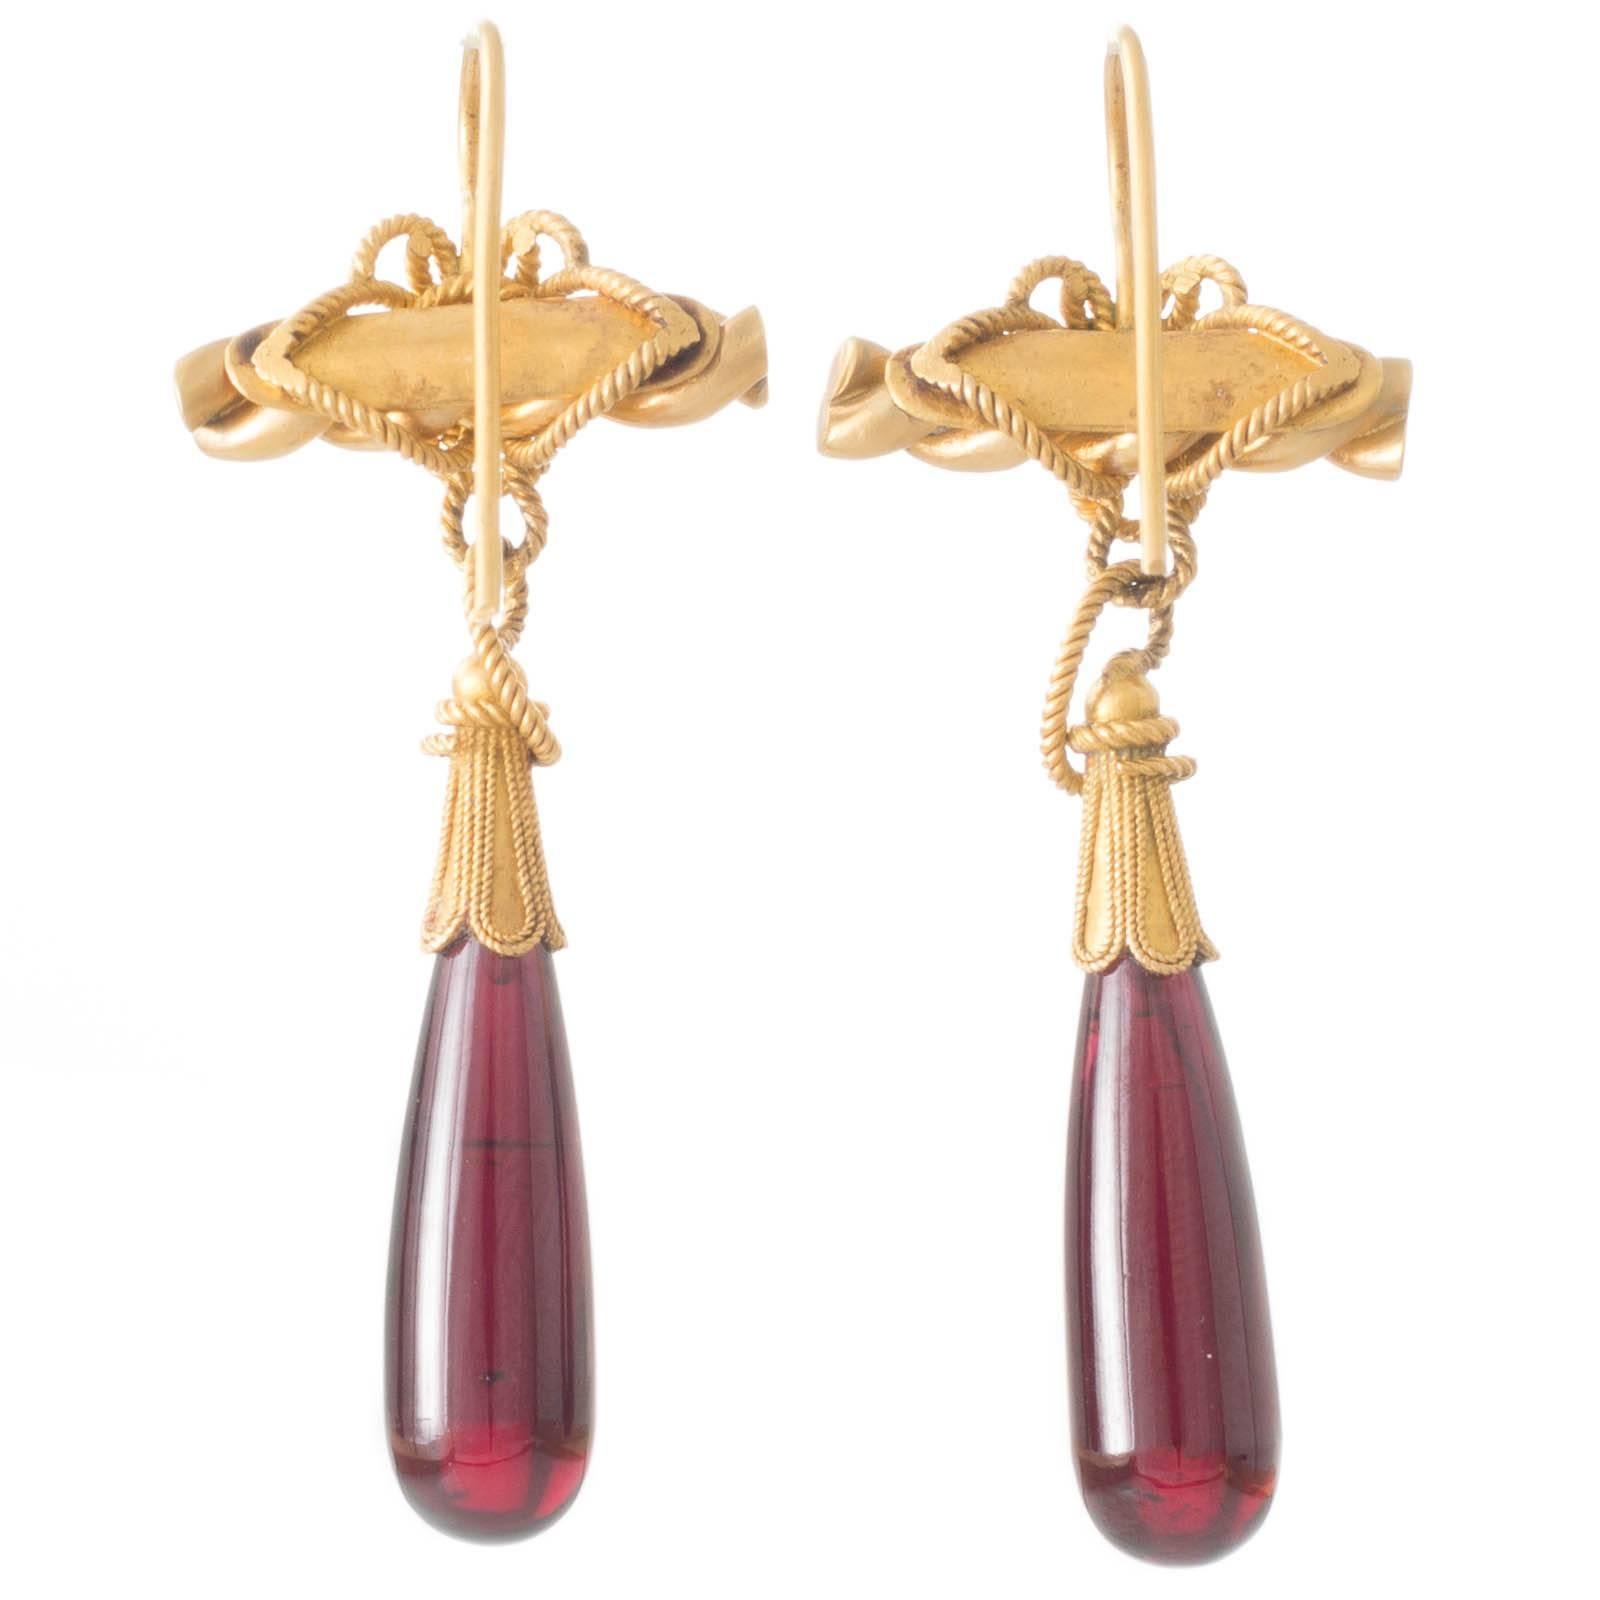 Antique earrings in yellow gold (testing as 20ct) each with decorative woven gold wire work around a horizontal twisted bar of gold connecting to polished garnet drops held in fluted gold tops all to fixed shepherd hooks. Weight: 12.9grams. 